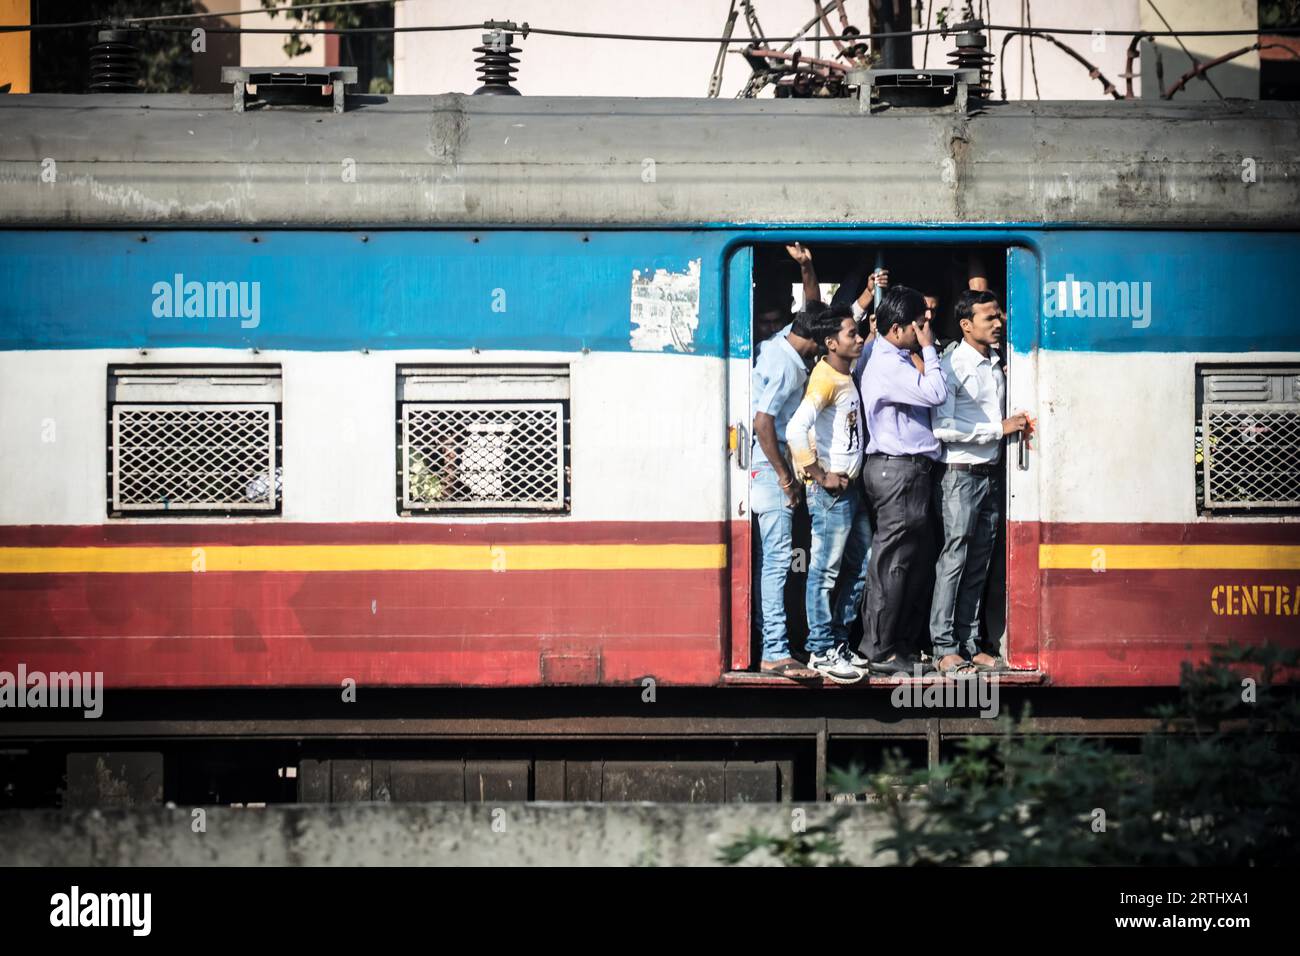 MUMBAI, INDIA, November 10 2017: Commuters on a crowded train hang at the door of an old train in Mumbai, India Stock Photo